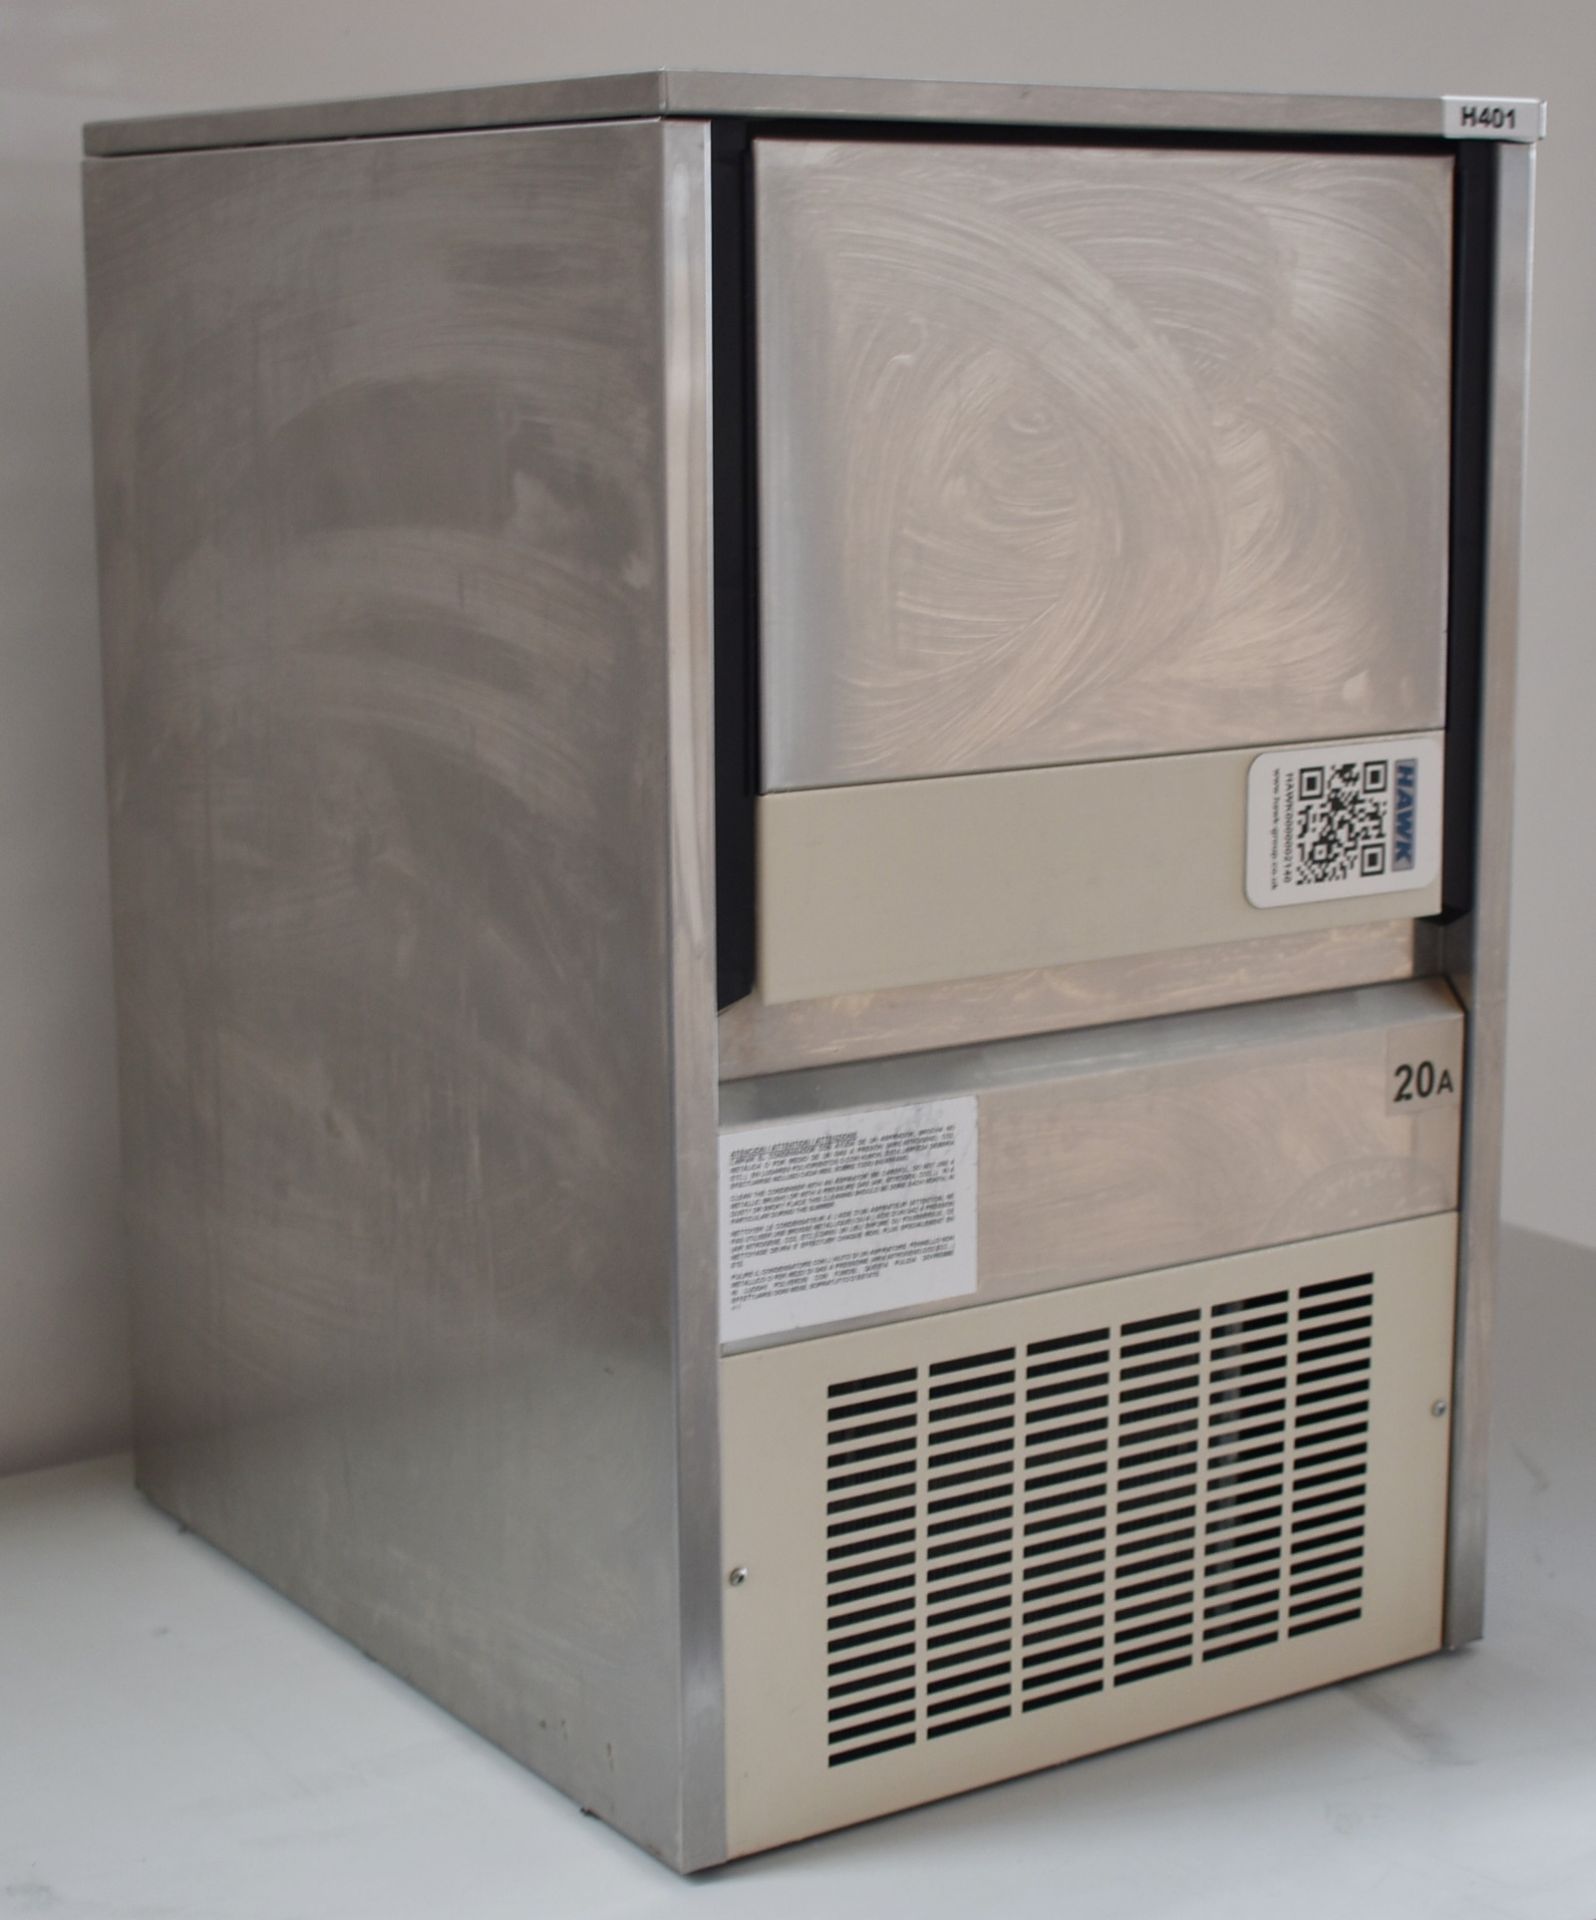 1 x Norpe Counter Top Ice Maker With Stainless Steel Exterior - Model Project Q20A - CL232 - - Image 2 of 6